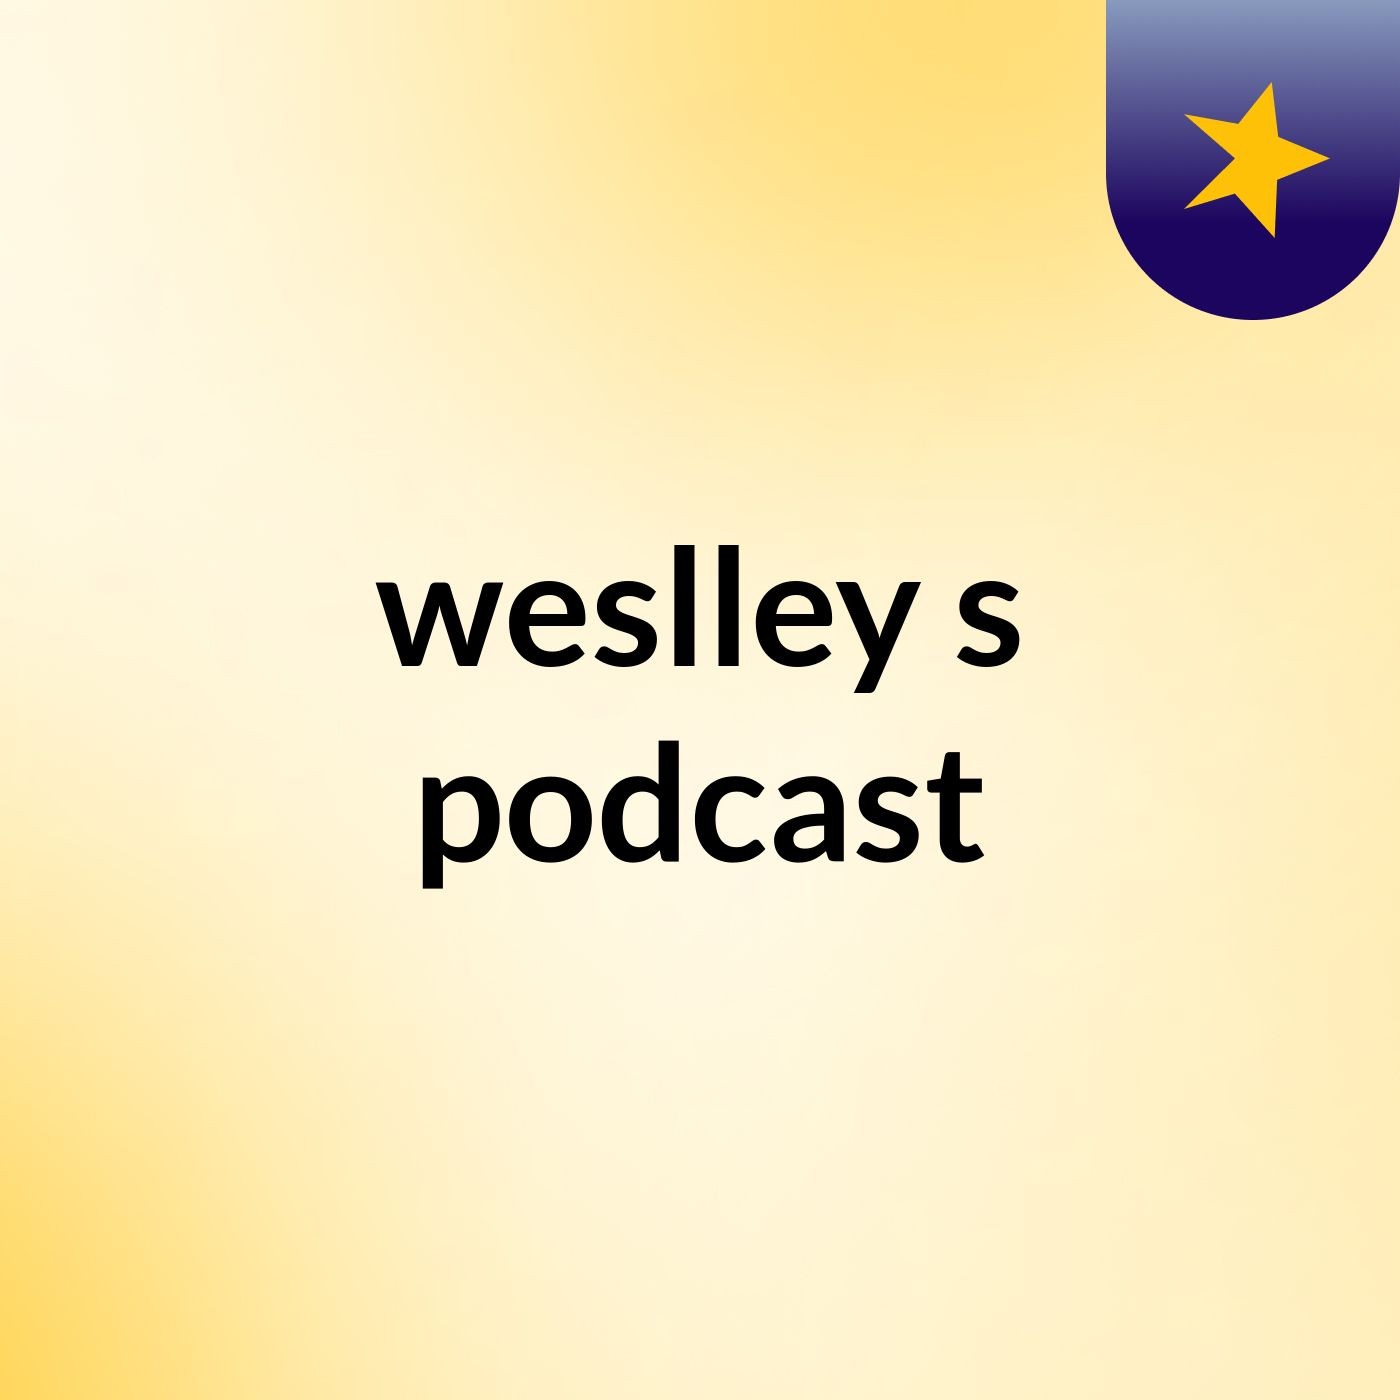 weslley's podcast